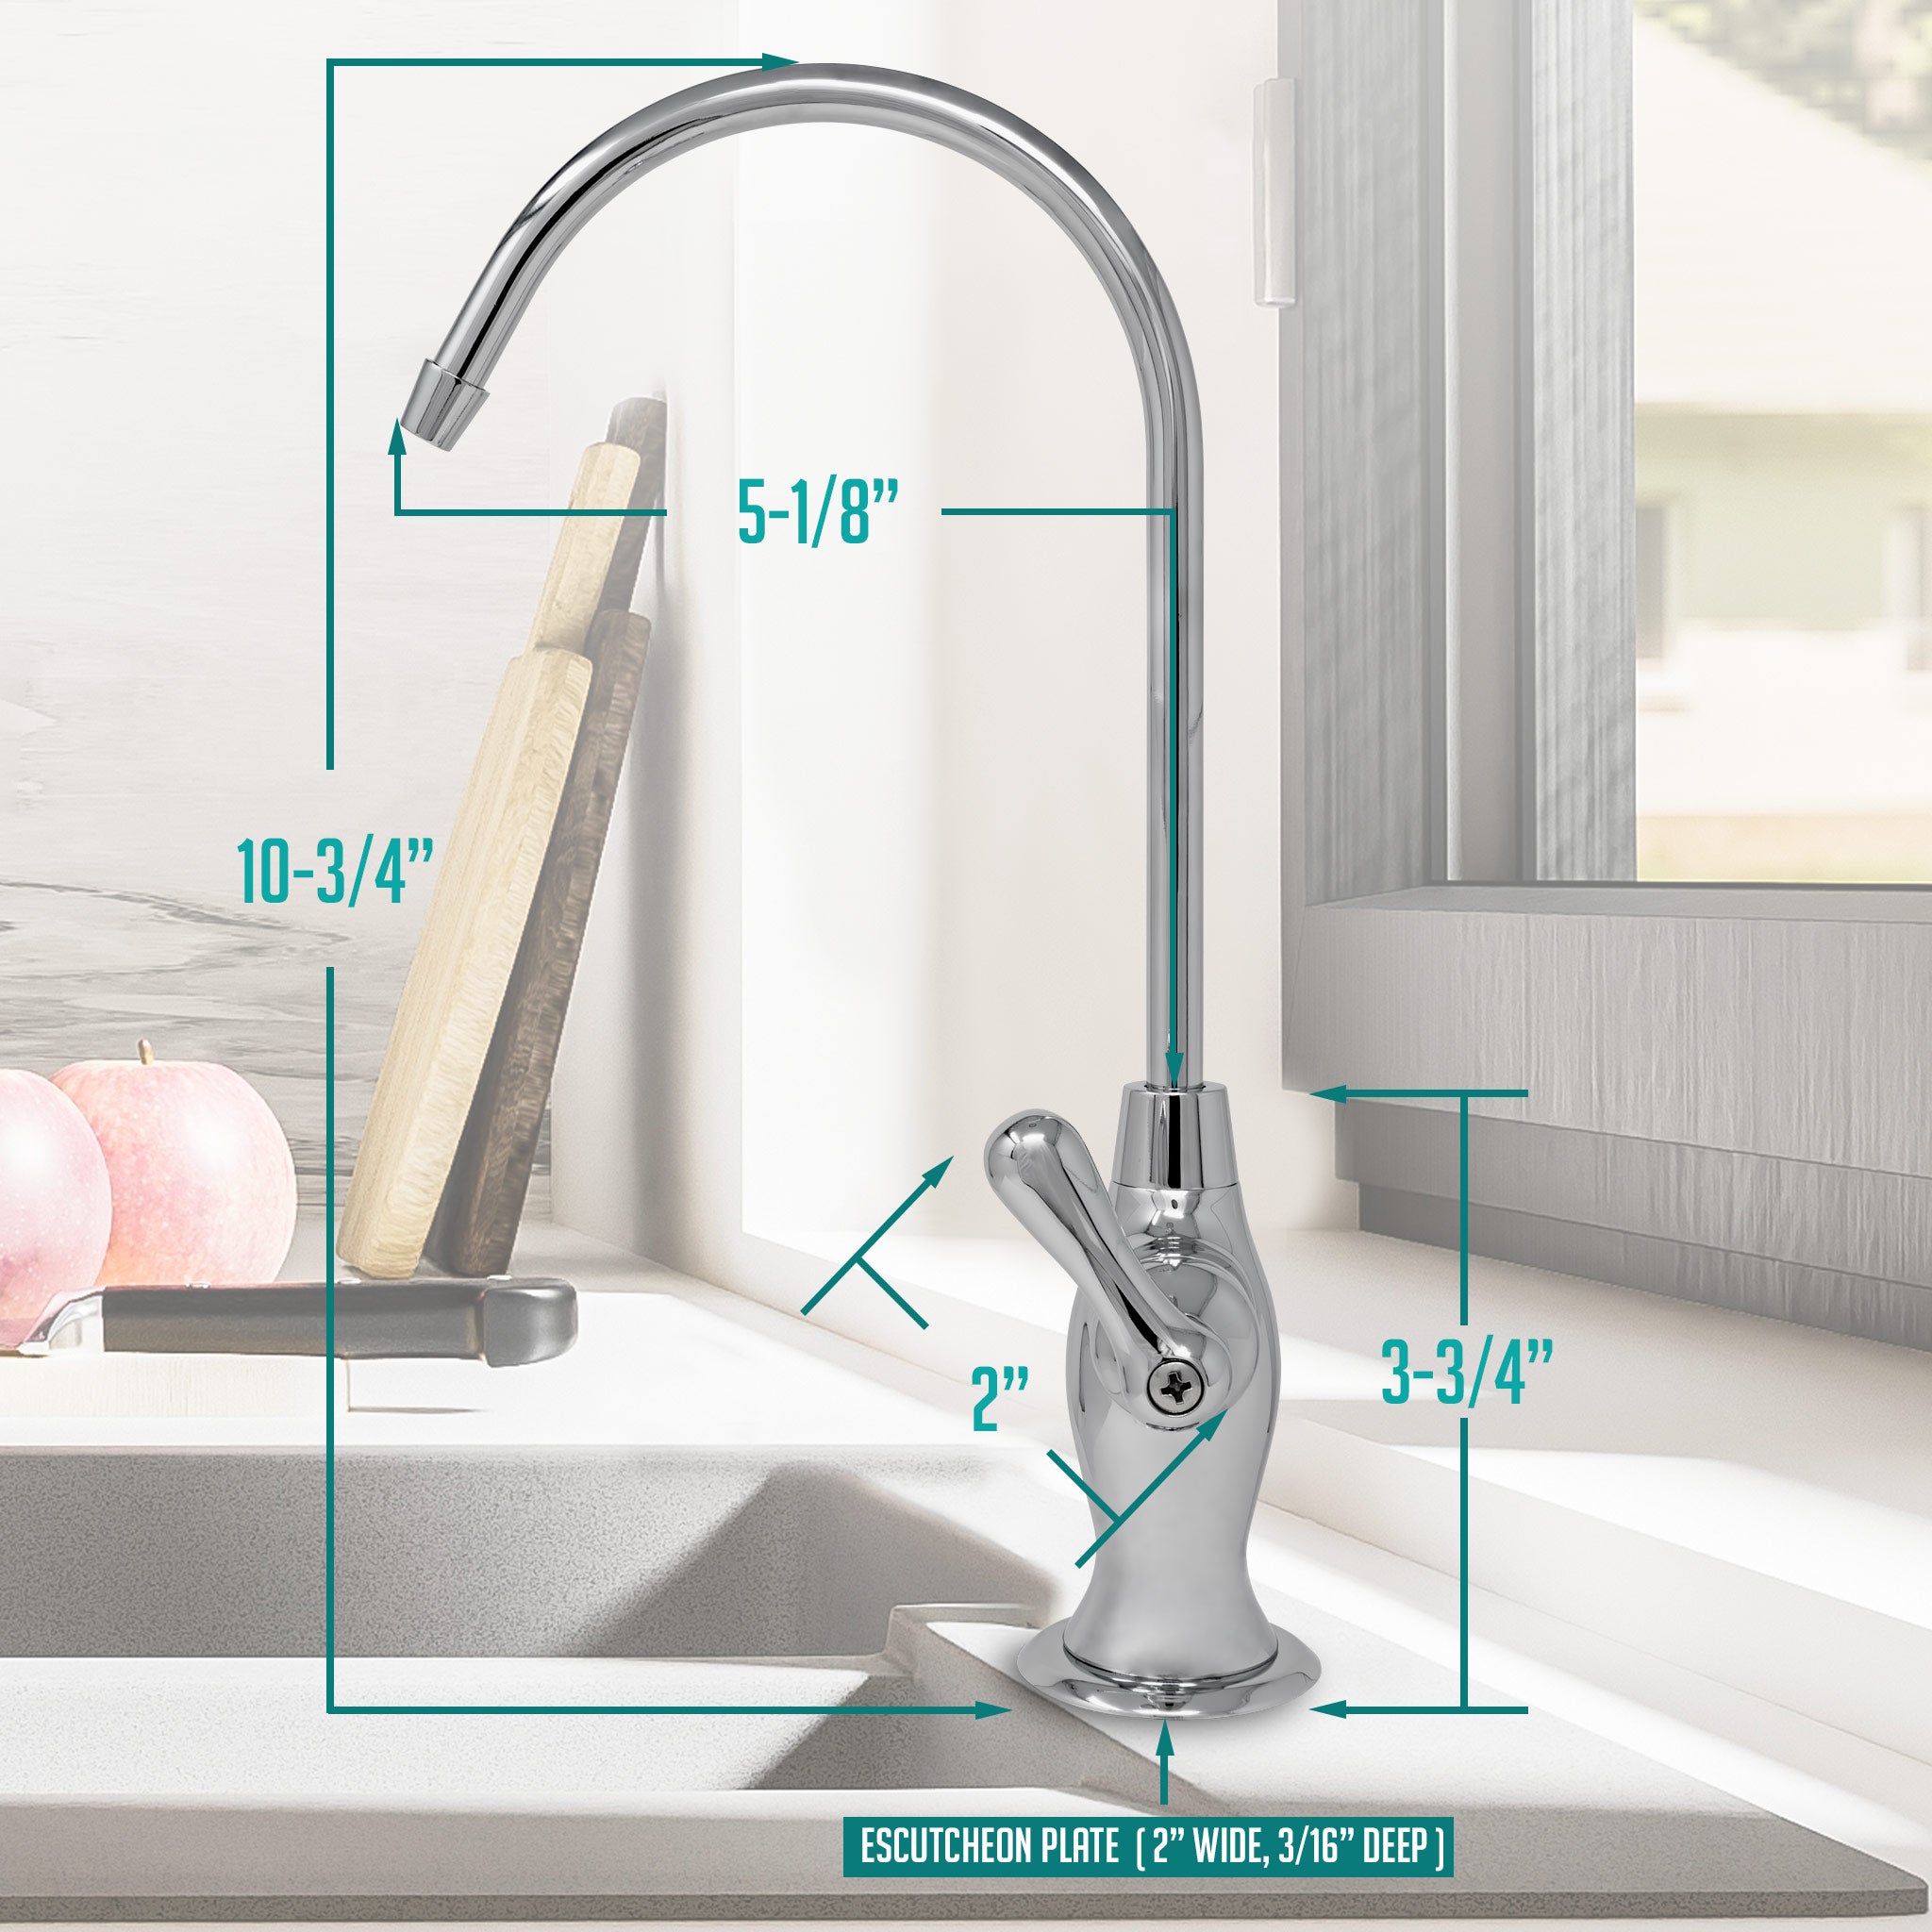 Water Filtration Faucet Vase Style Chrome Reverse Osmosis Non Air Gap. Certified by NSF.